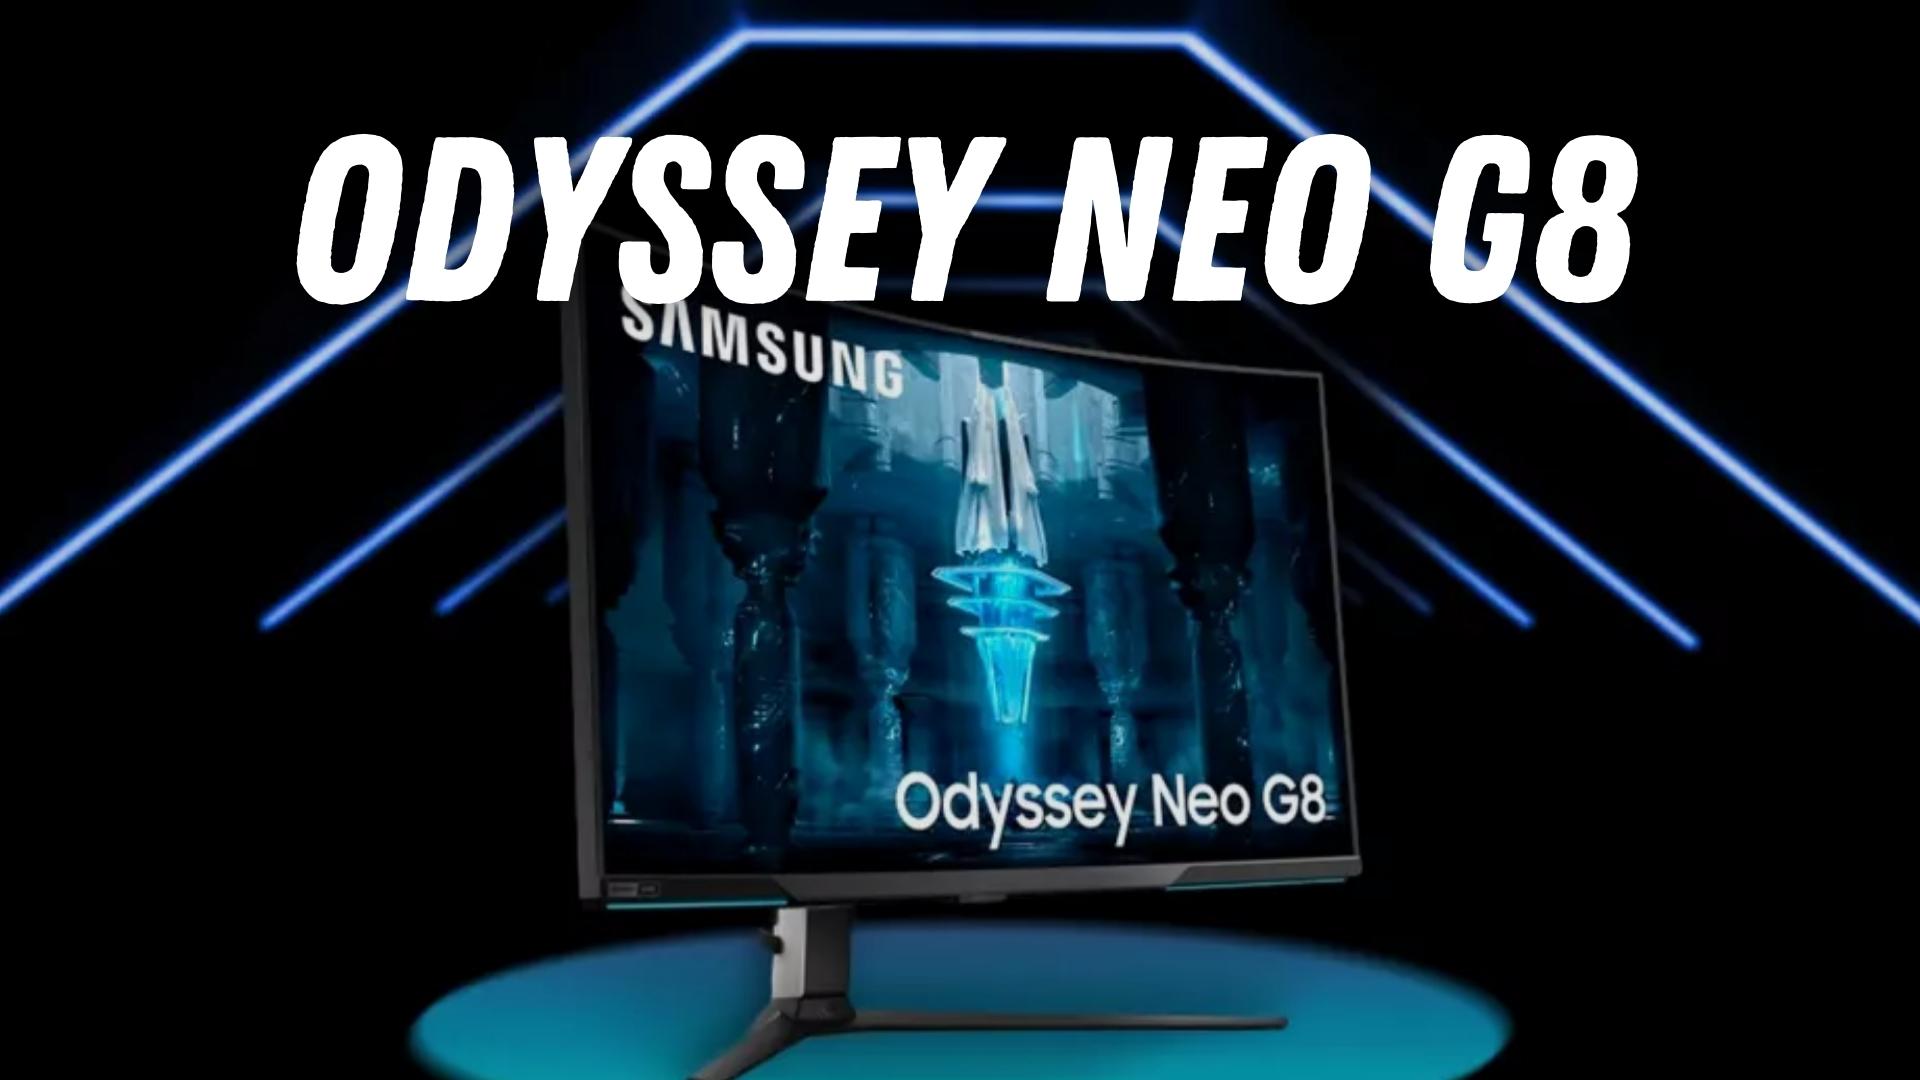 Samsung Odyssey Neo G8, two more announced at CES 2022